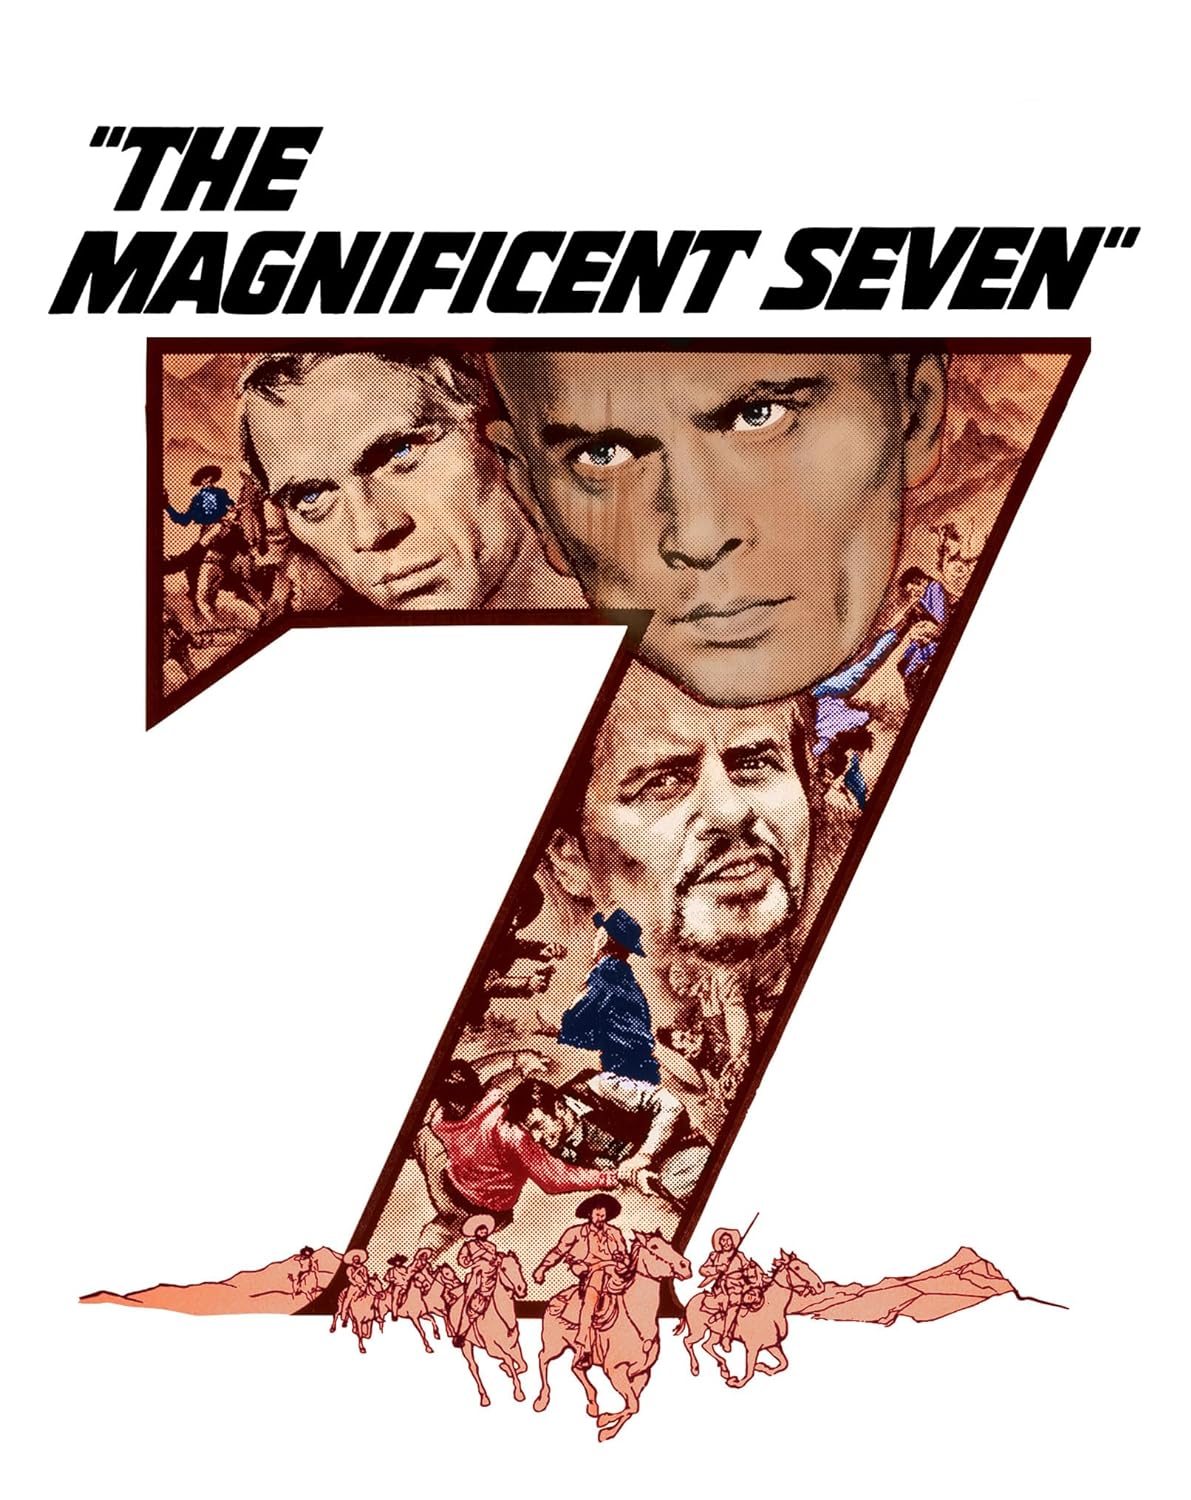 THE MAGNIFICENT SEVEN (LIMITED EDITION) 4K UHD/BLU-RAY STEELBOOK [PRE-ORDER]